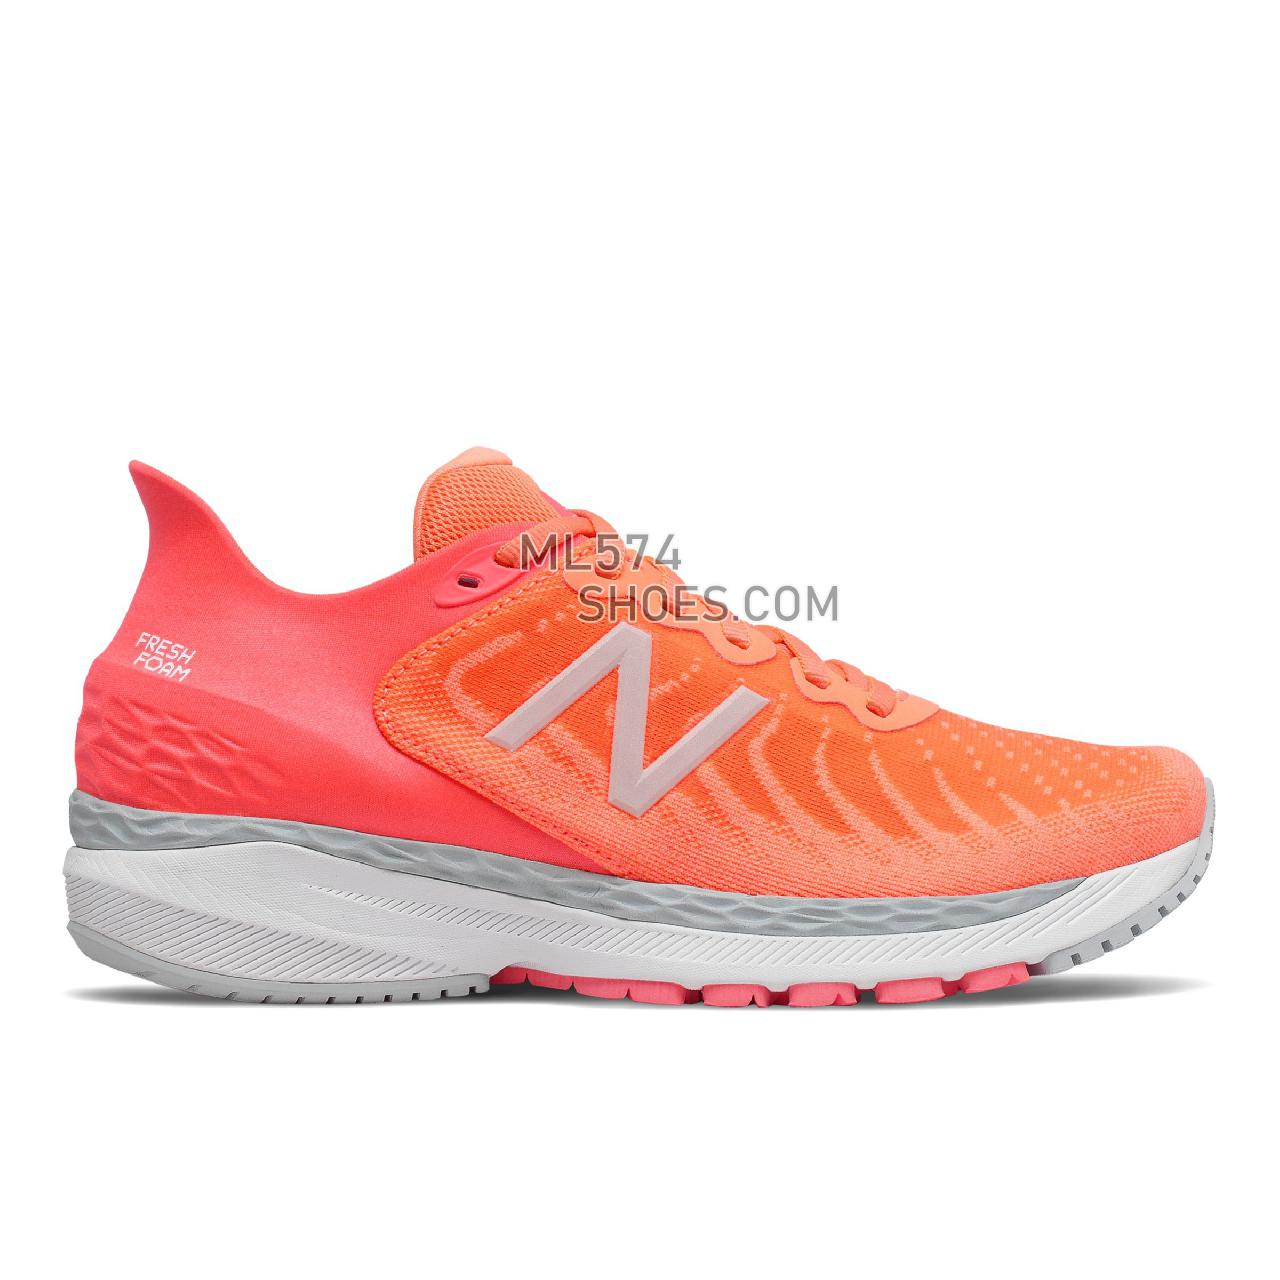 New Balance Fresh Foam 860v11 - Women's Stability Running - Citrus Punch with Vivid Coral - W860P11